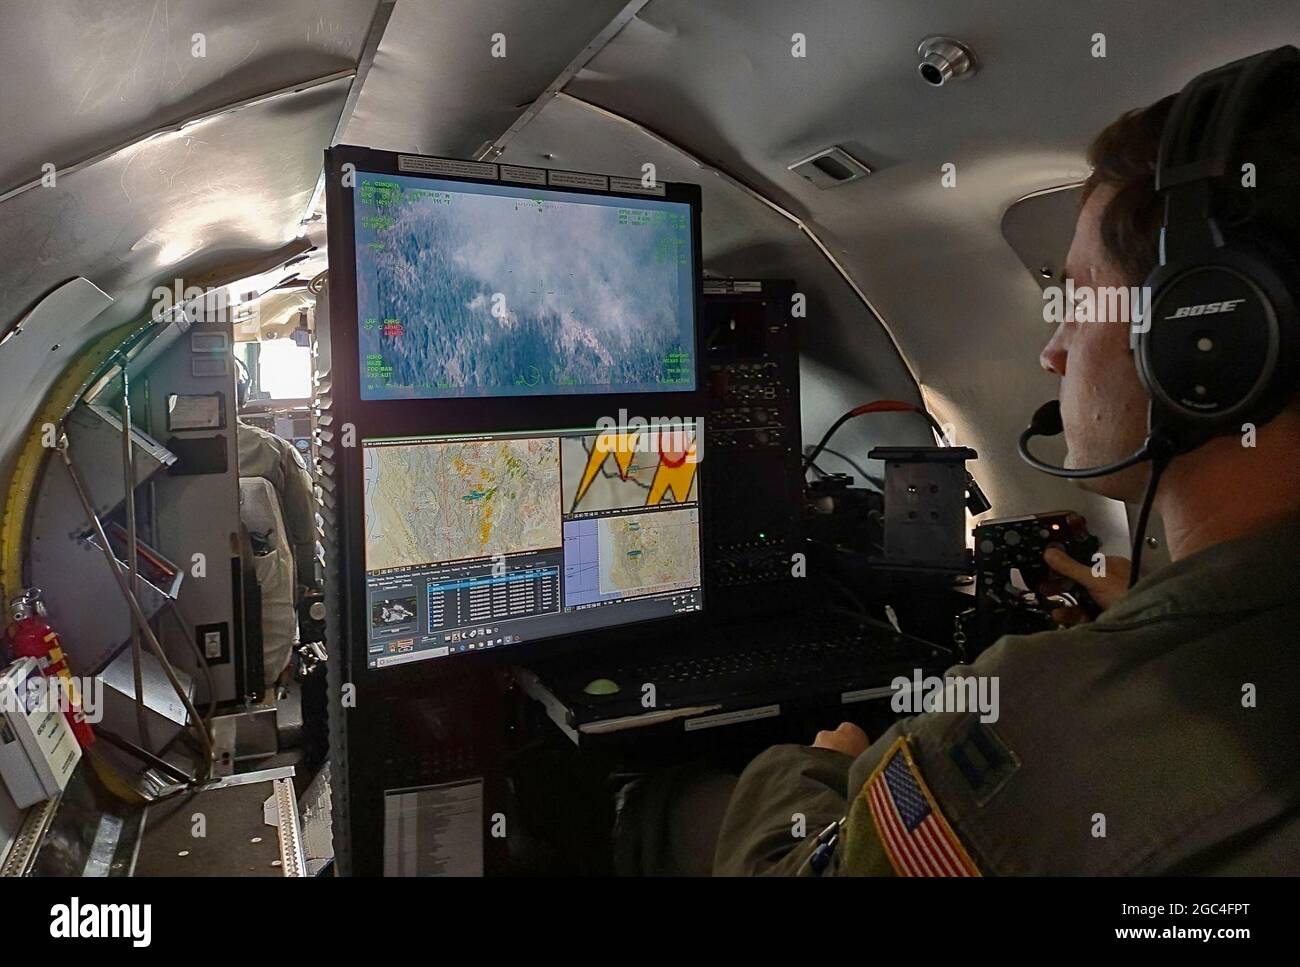 Capt. Alex McArdel, 141st Air Refueling Wing RC-26B aircraft mission systems officer, uses the aircraft's camera to map and detect wildland fires in the north-western region of the United States, August 1, 2021. The RC-26 is tasked with utilizing its highly mobile platform by making infrared images and video of the fires from above in order to map and detect wildland fires and hotspots in the western region of the United States. The RC-26 crews can detect hotspots from up to 60 nautical miles away before they become fires and help direct teams to those locations. First Air Force (Air Forces No Stock Photo